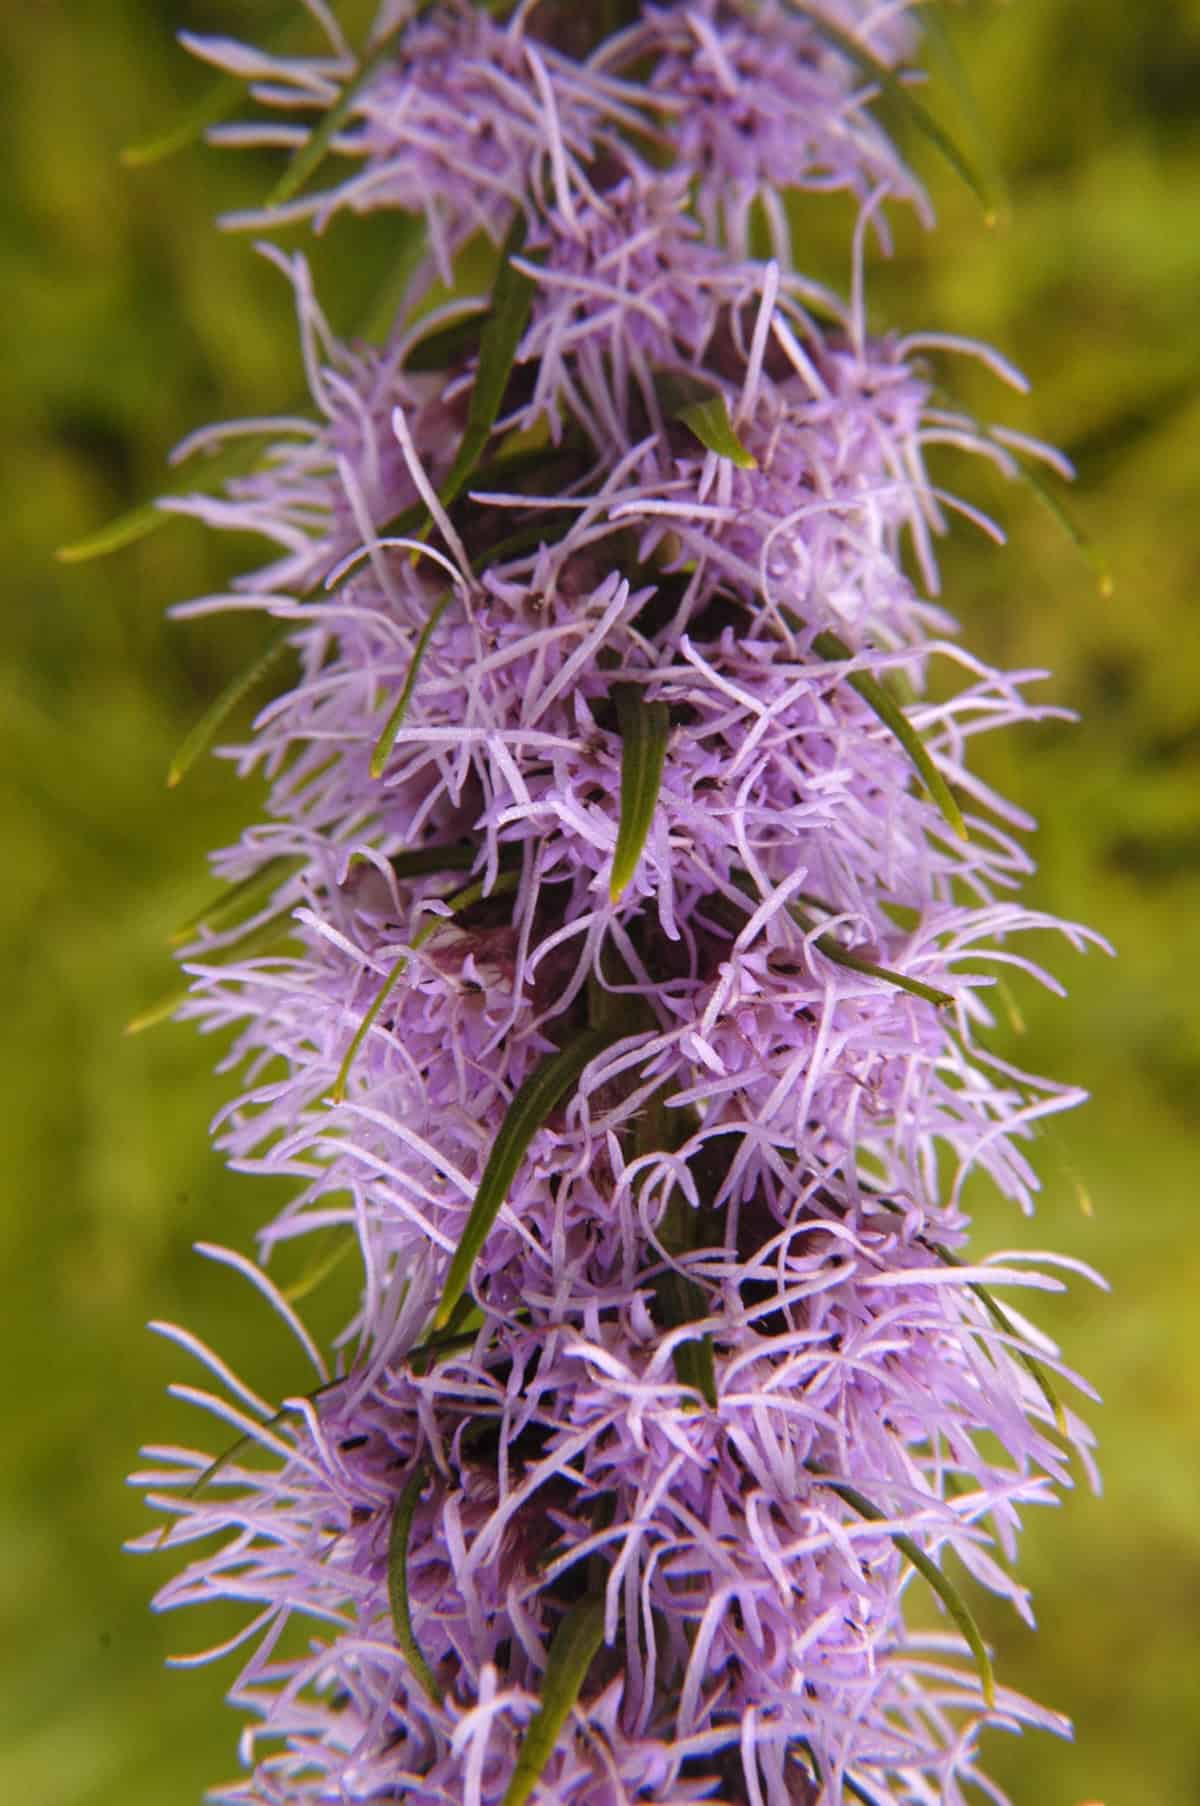 Close-up view of a dense cluster of light purple Liatris Spicata, also known as Prairie Gay Feather, with thin elongated petals on a green stem, against the blurred backdrop of Wisconsin's lush green foliage.